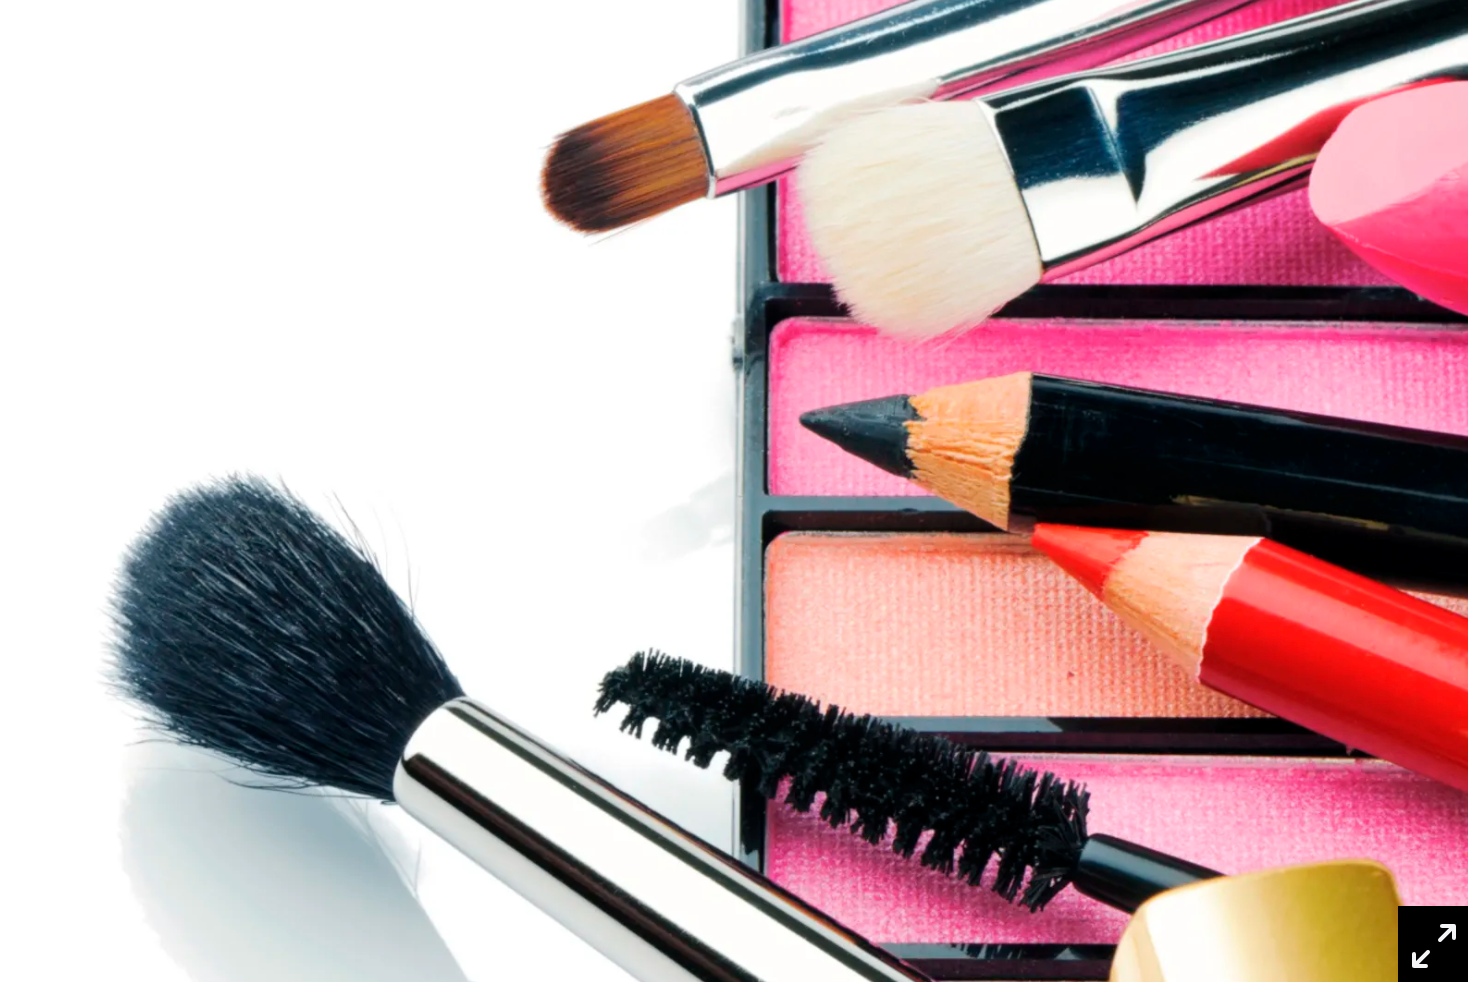 Green Beauty Cosmetics Guide--PFAS Forever Chemicals & Makeup